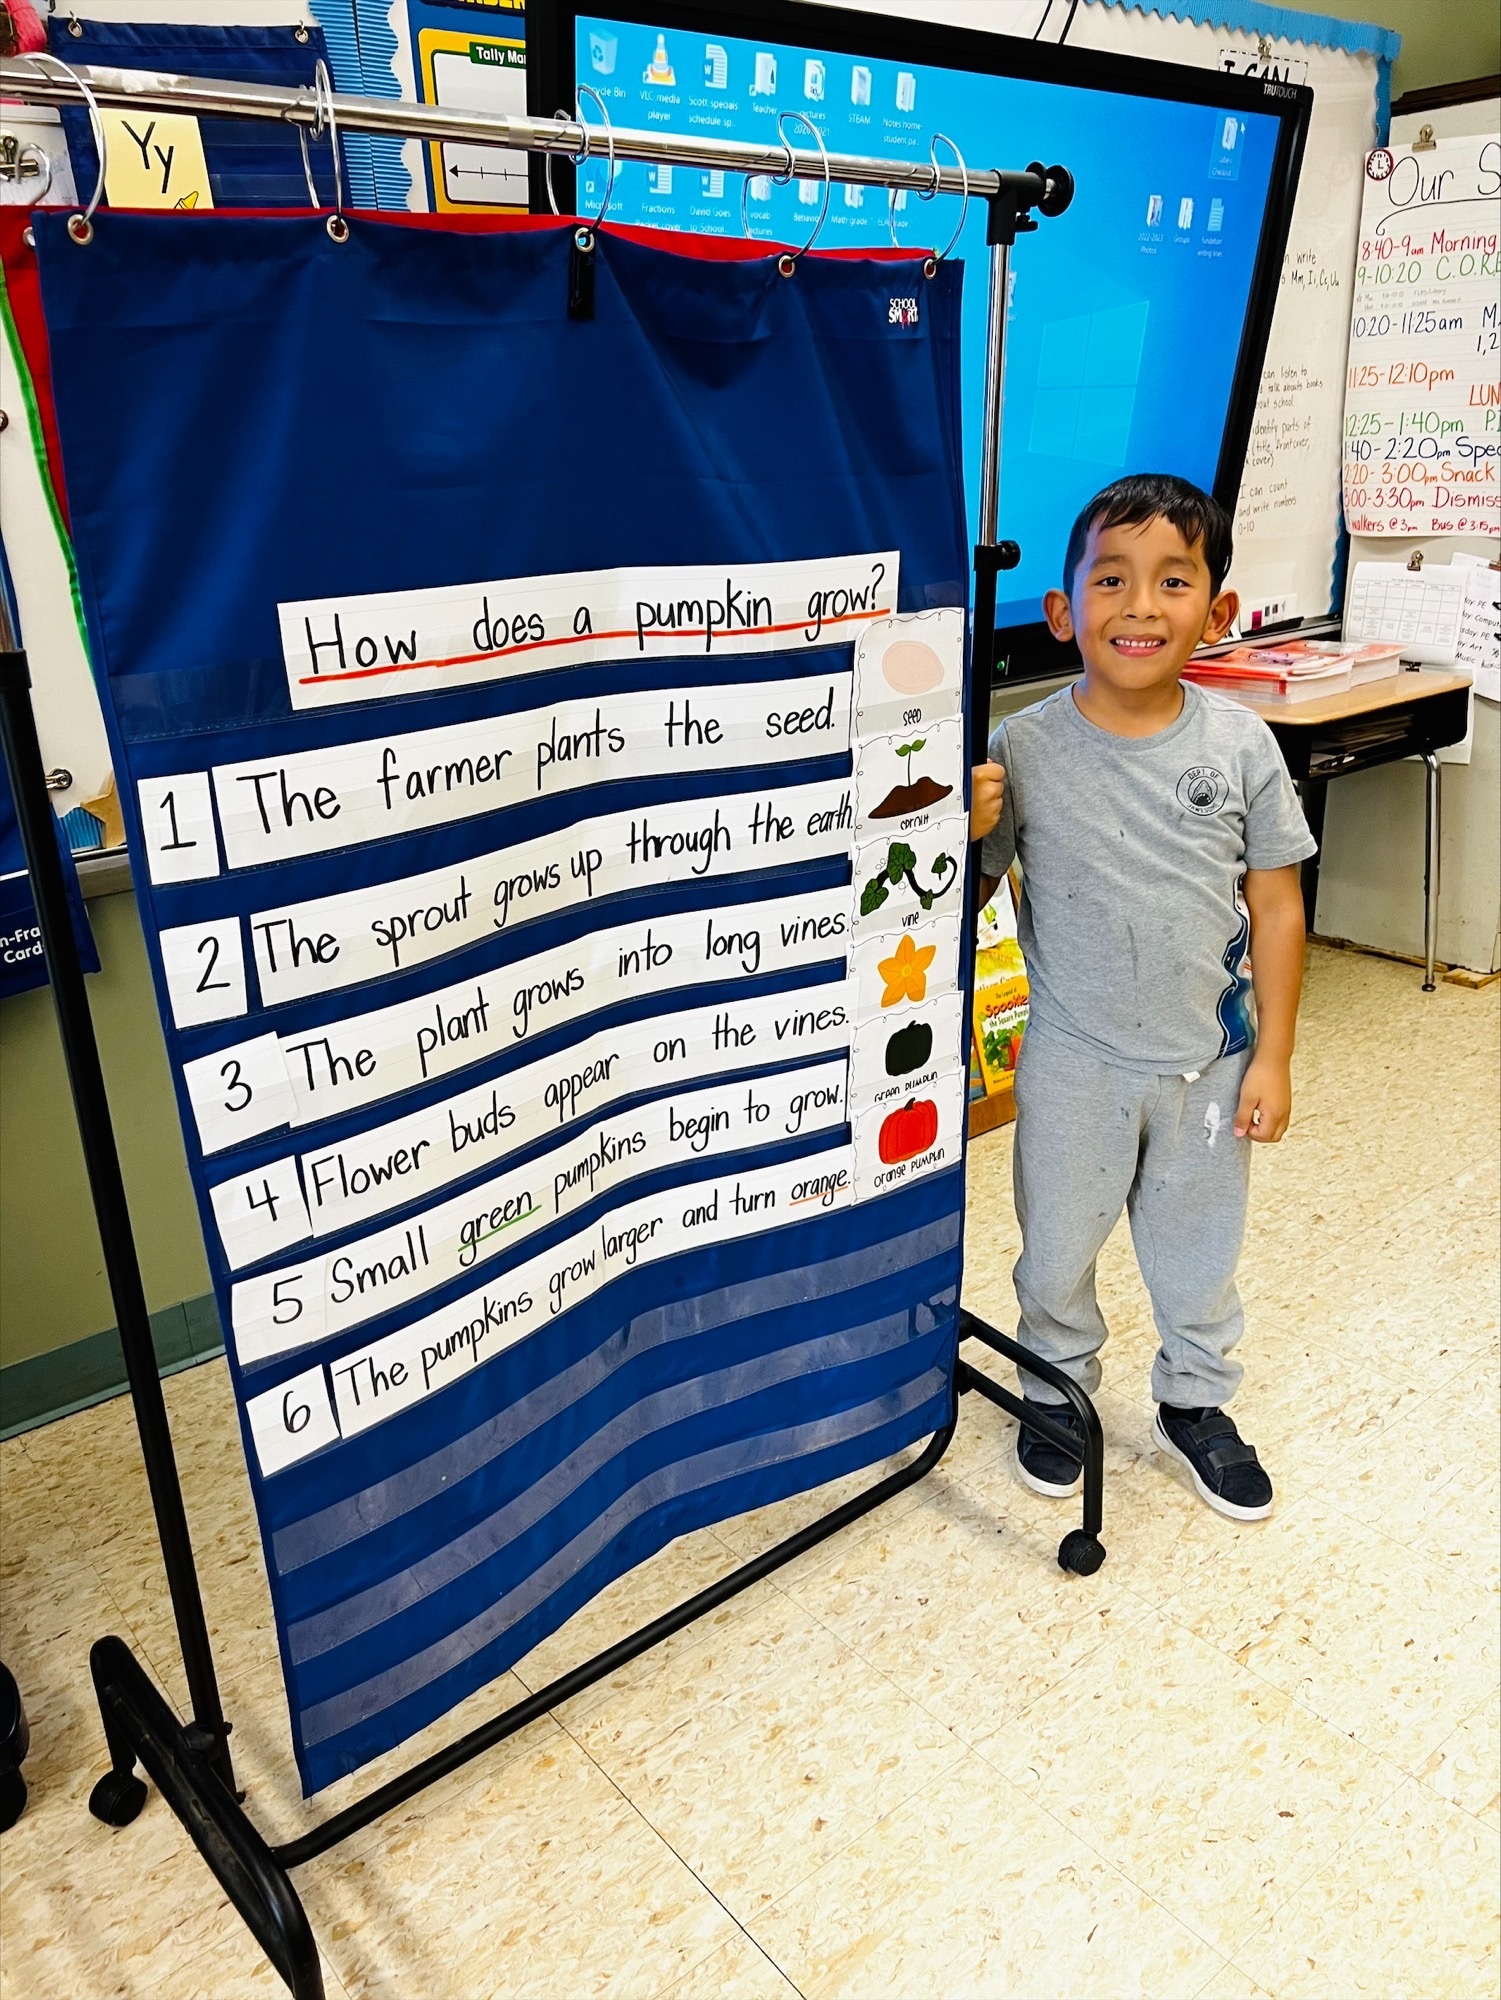 Hampton Bays Elementary School first graders, including Josue Valladares, have been studying pumpkins and how they grow. They read books on the subject, learned words appropriate vocabulary,  and put pictures in order to show the stages of pumpkin growth. COURTESY HAMPTON BAYS SCHOOL DISTRICT